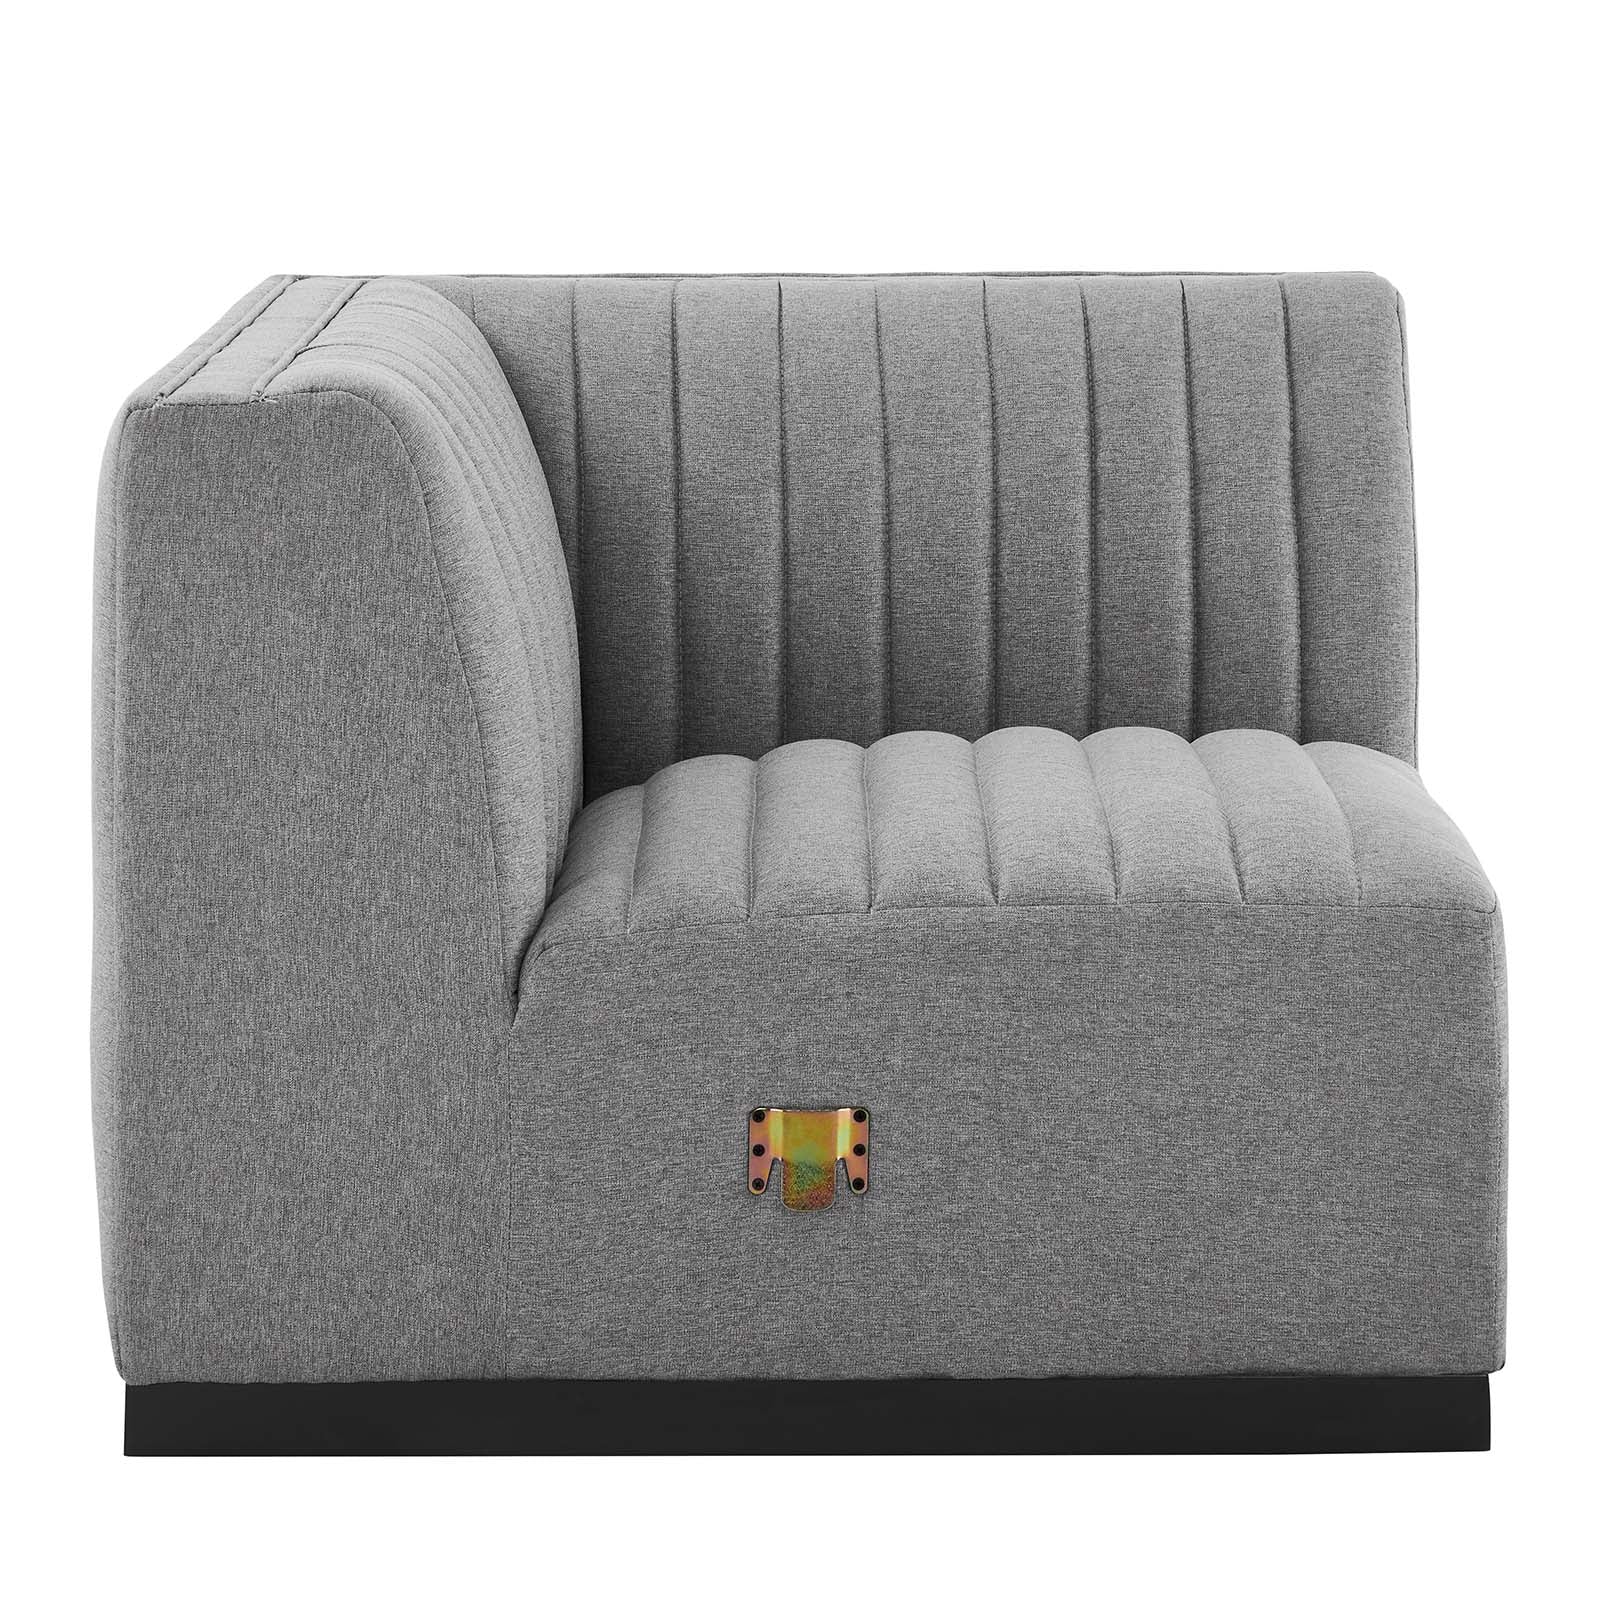 Modway Accent Chairs - Conjure Channel Tufted Upholstered Fabric Left Corner Chair Black Light Gray